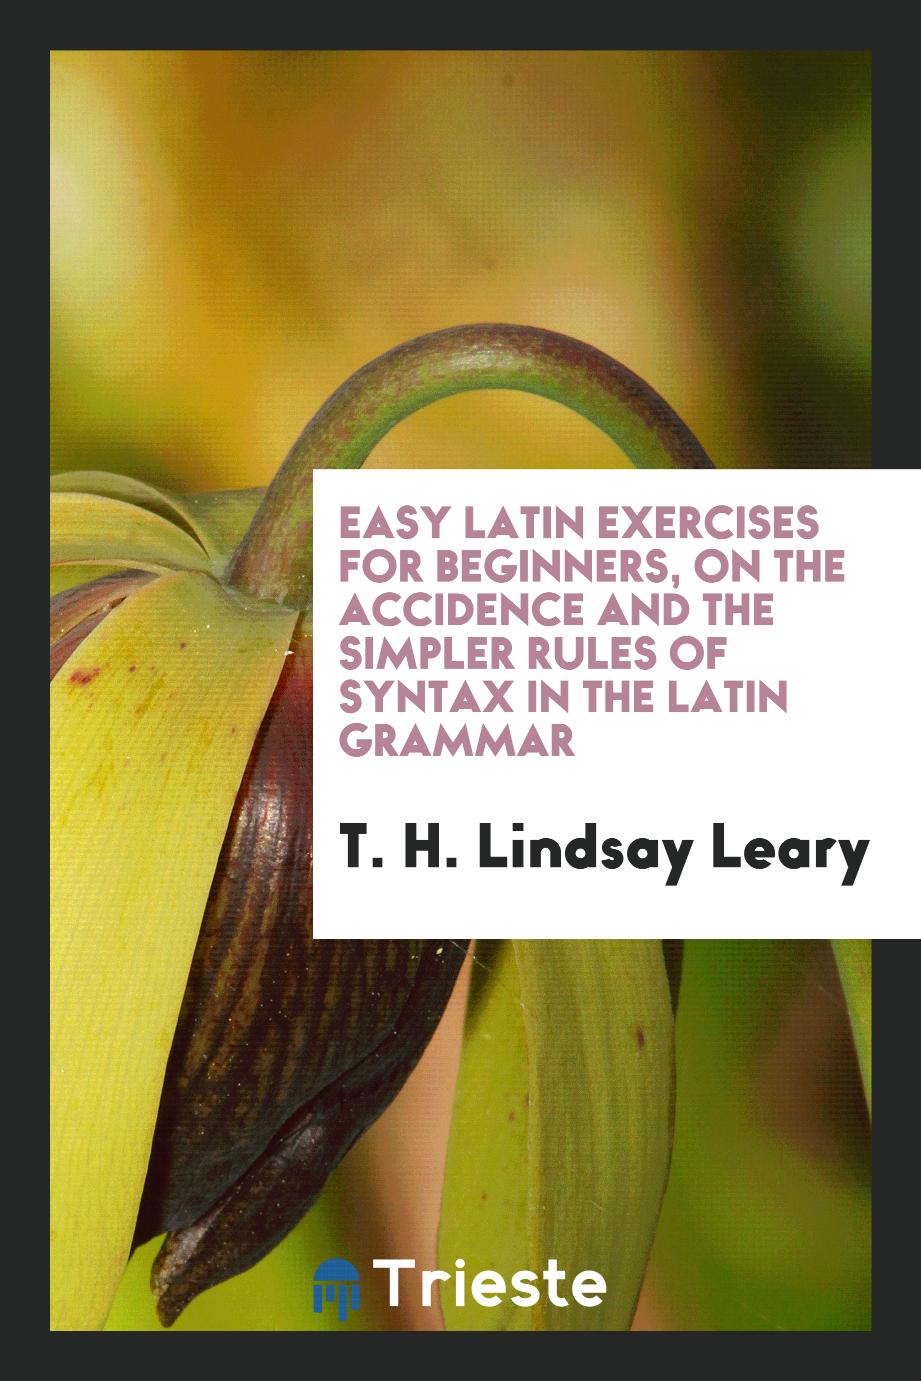 Easy Latin exercises for beginners, on the accidence and the simpler rules of syntax in the latin grammar